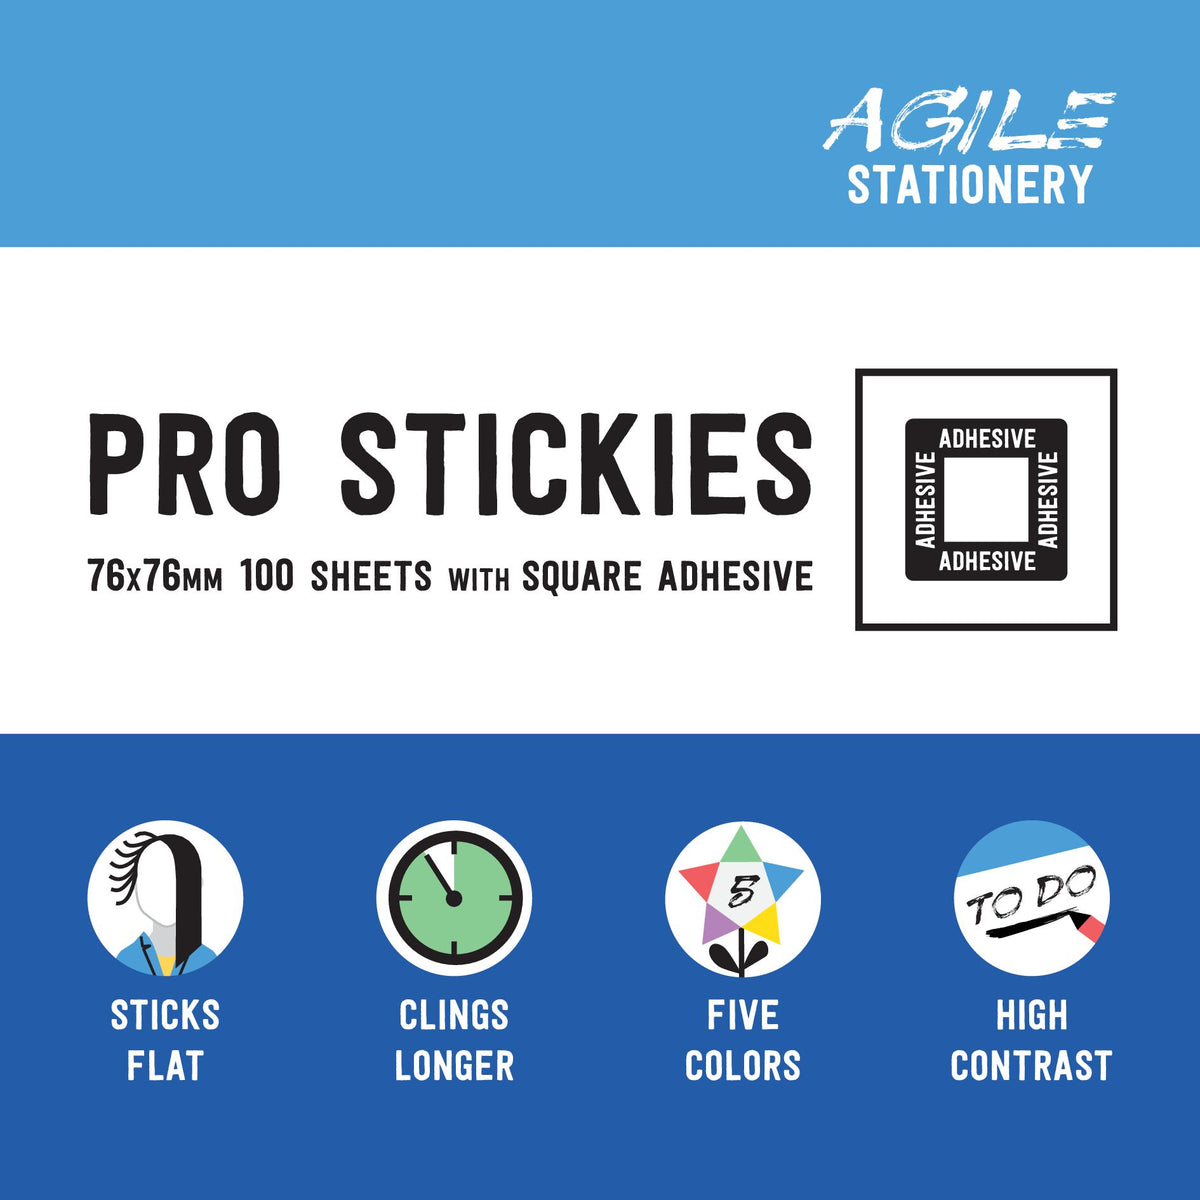 Stick Flat Pro Stickies with Square Adhesive (5 Pack) – Agile